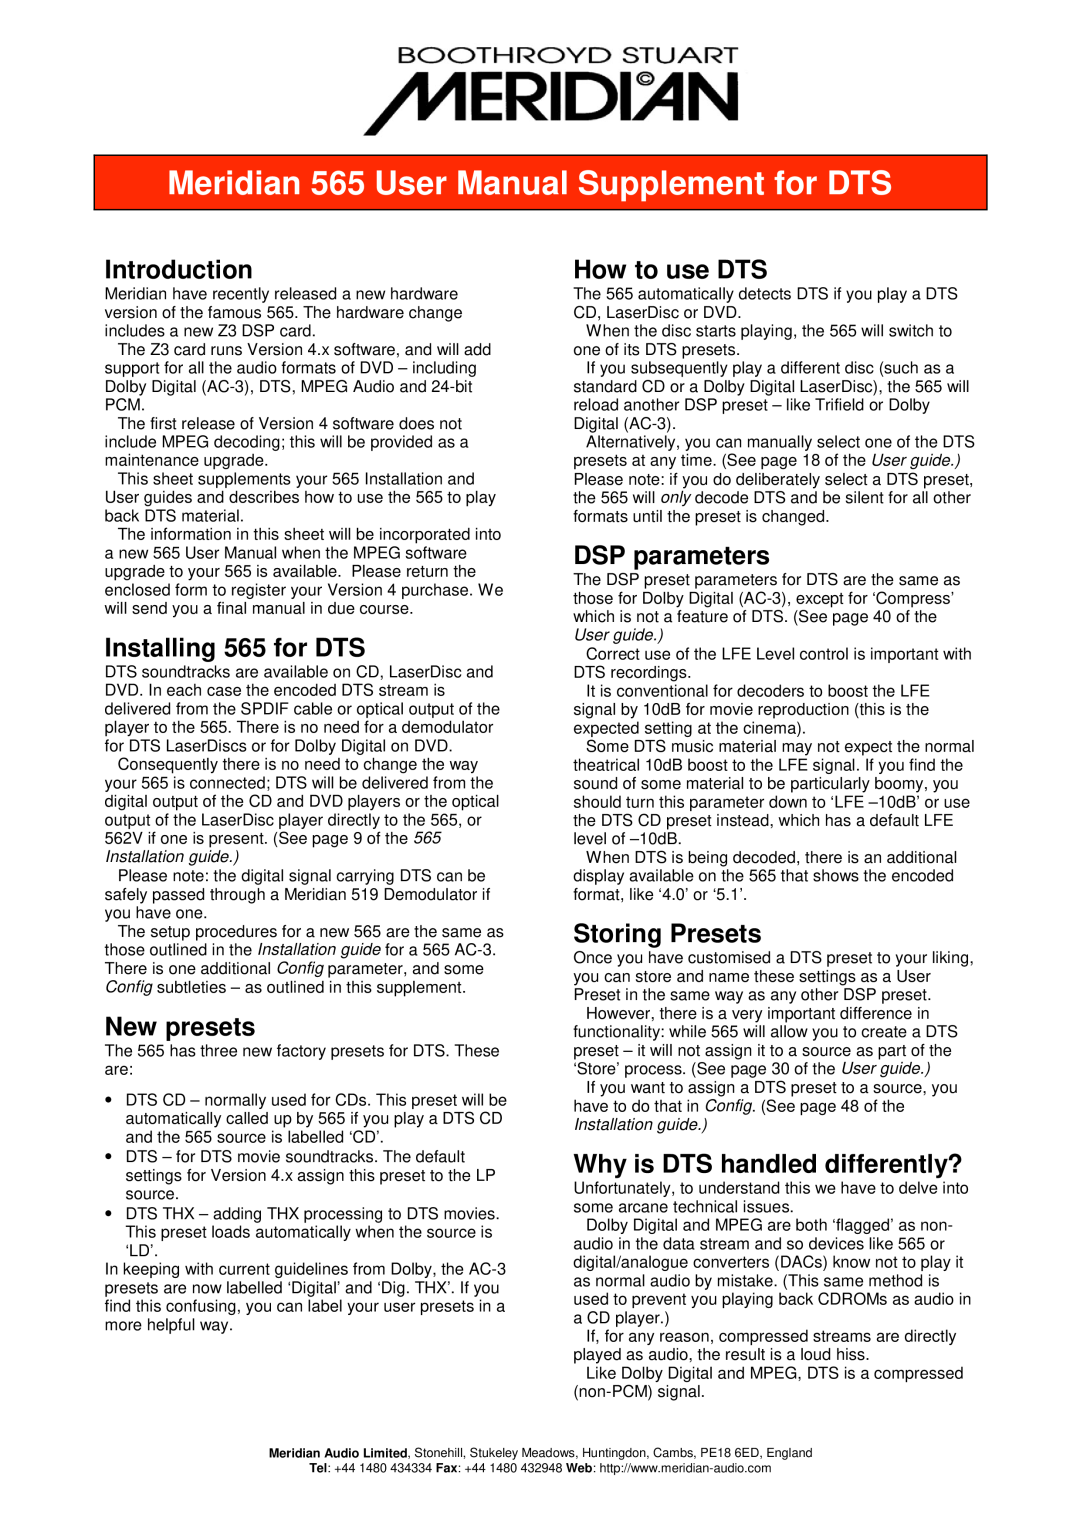 Meridian America user manual Meridian 565 User Manual Supplement for DTS, Introduction, Installing 565 for DTS 